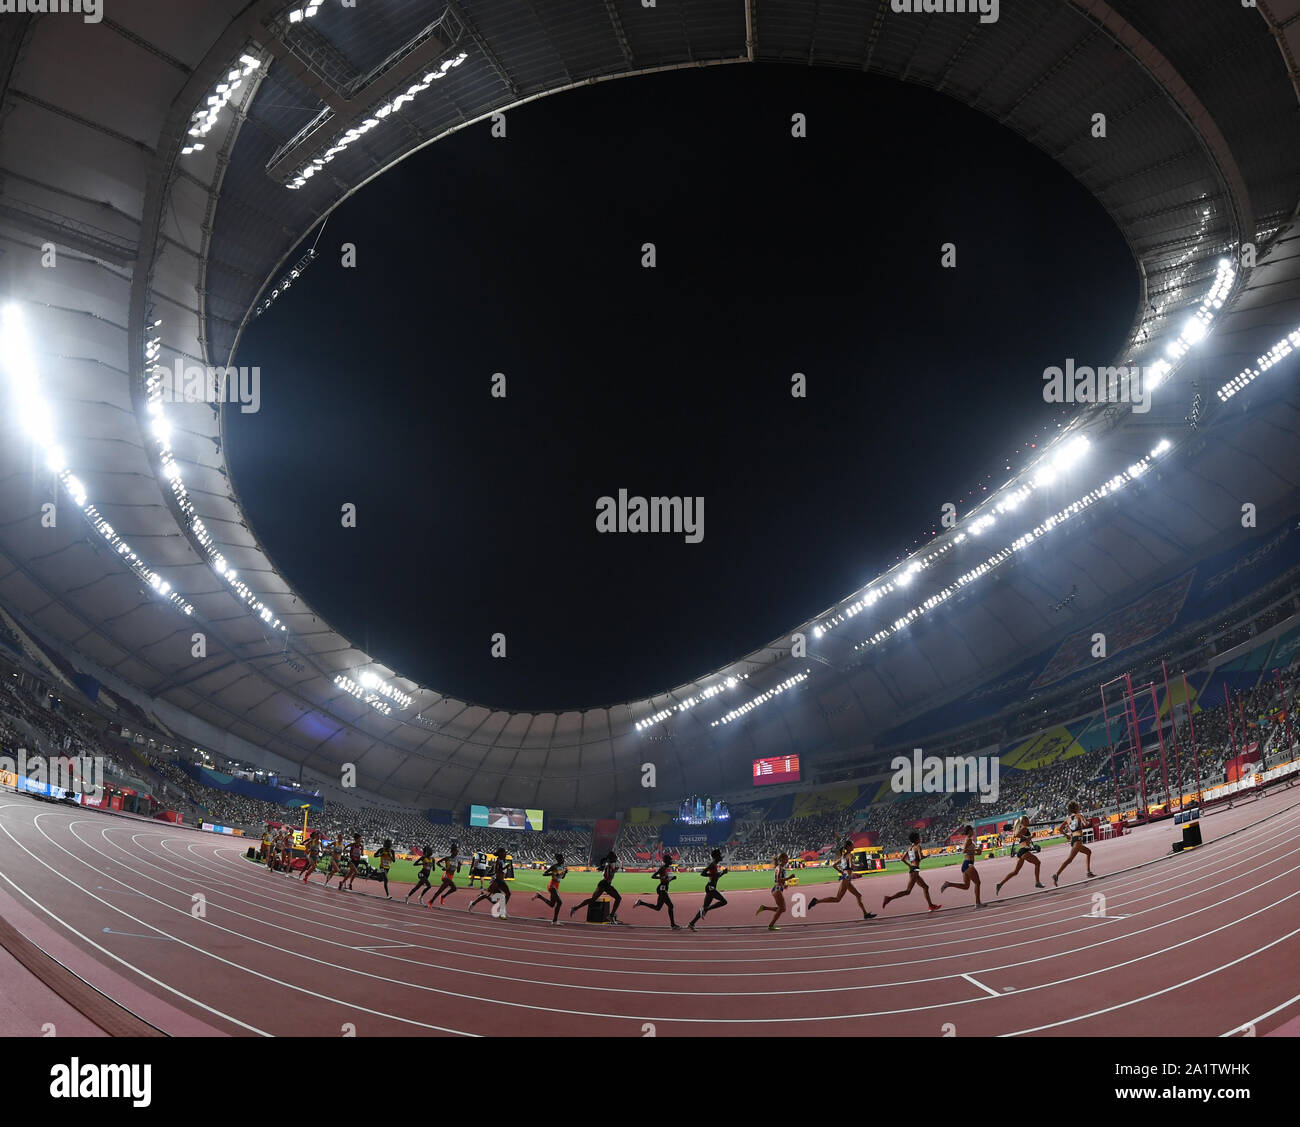 Doha, Qatar. 28th Sep, 2019. Athletes compete during the women's 10,000m final at the 2019 IAAF World Championships in Doha, Qatar, Sept. 28, 2019. Credit: Jia Yuchen/Xinhua/Alamy Live News Stock Photo